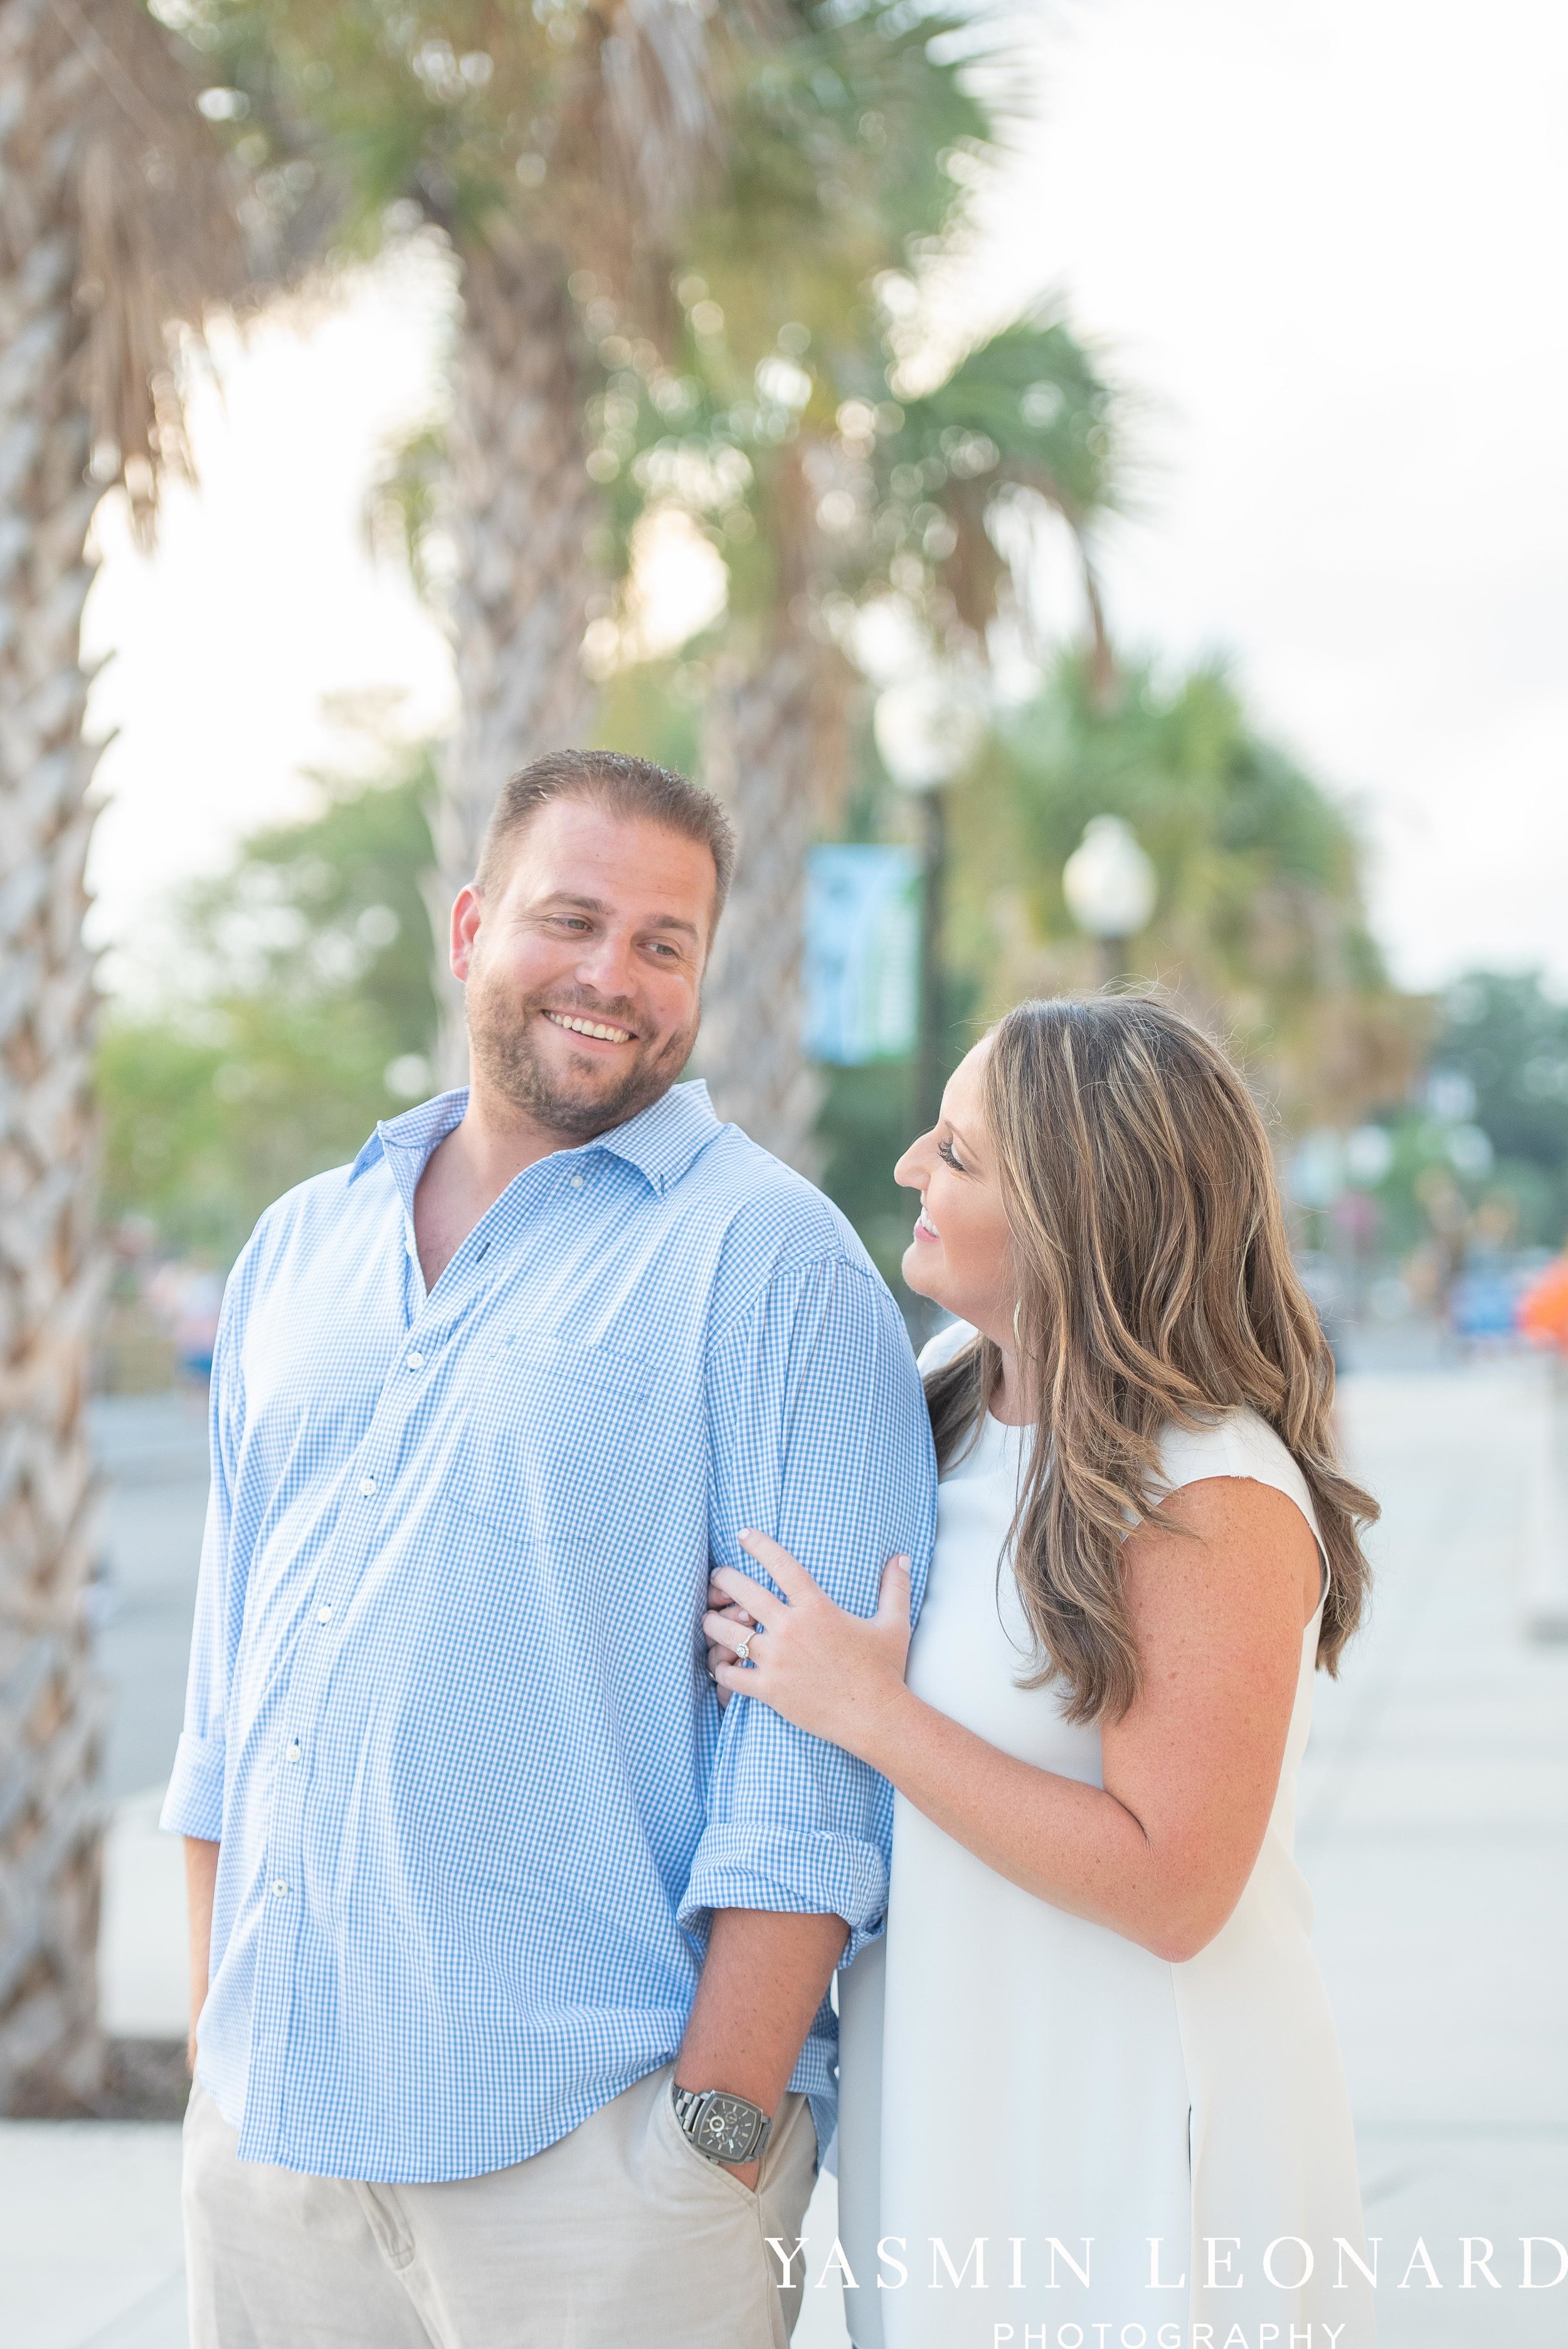 Wrightsville Beach Engagement Session - Wilmington Engagement Session - Downtown Wilmington Engagement Session - NC Weddings - Wilmington NC - Yasmin Leonard Photography-5.jpg